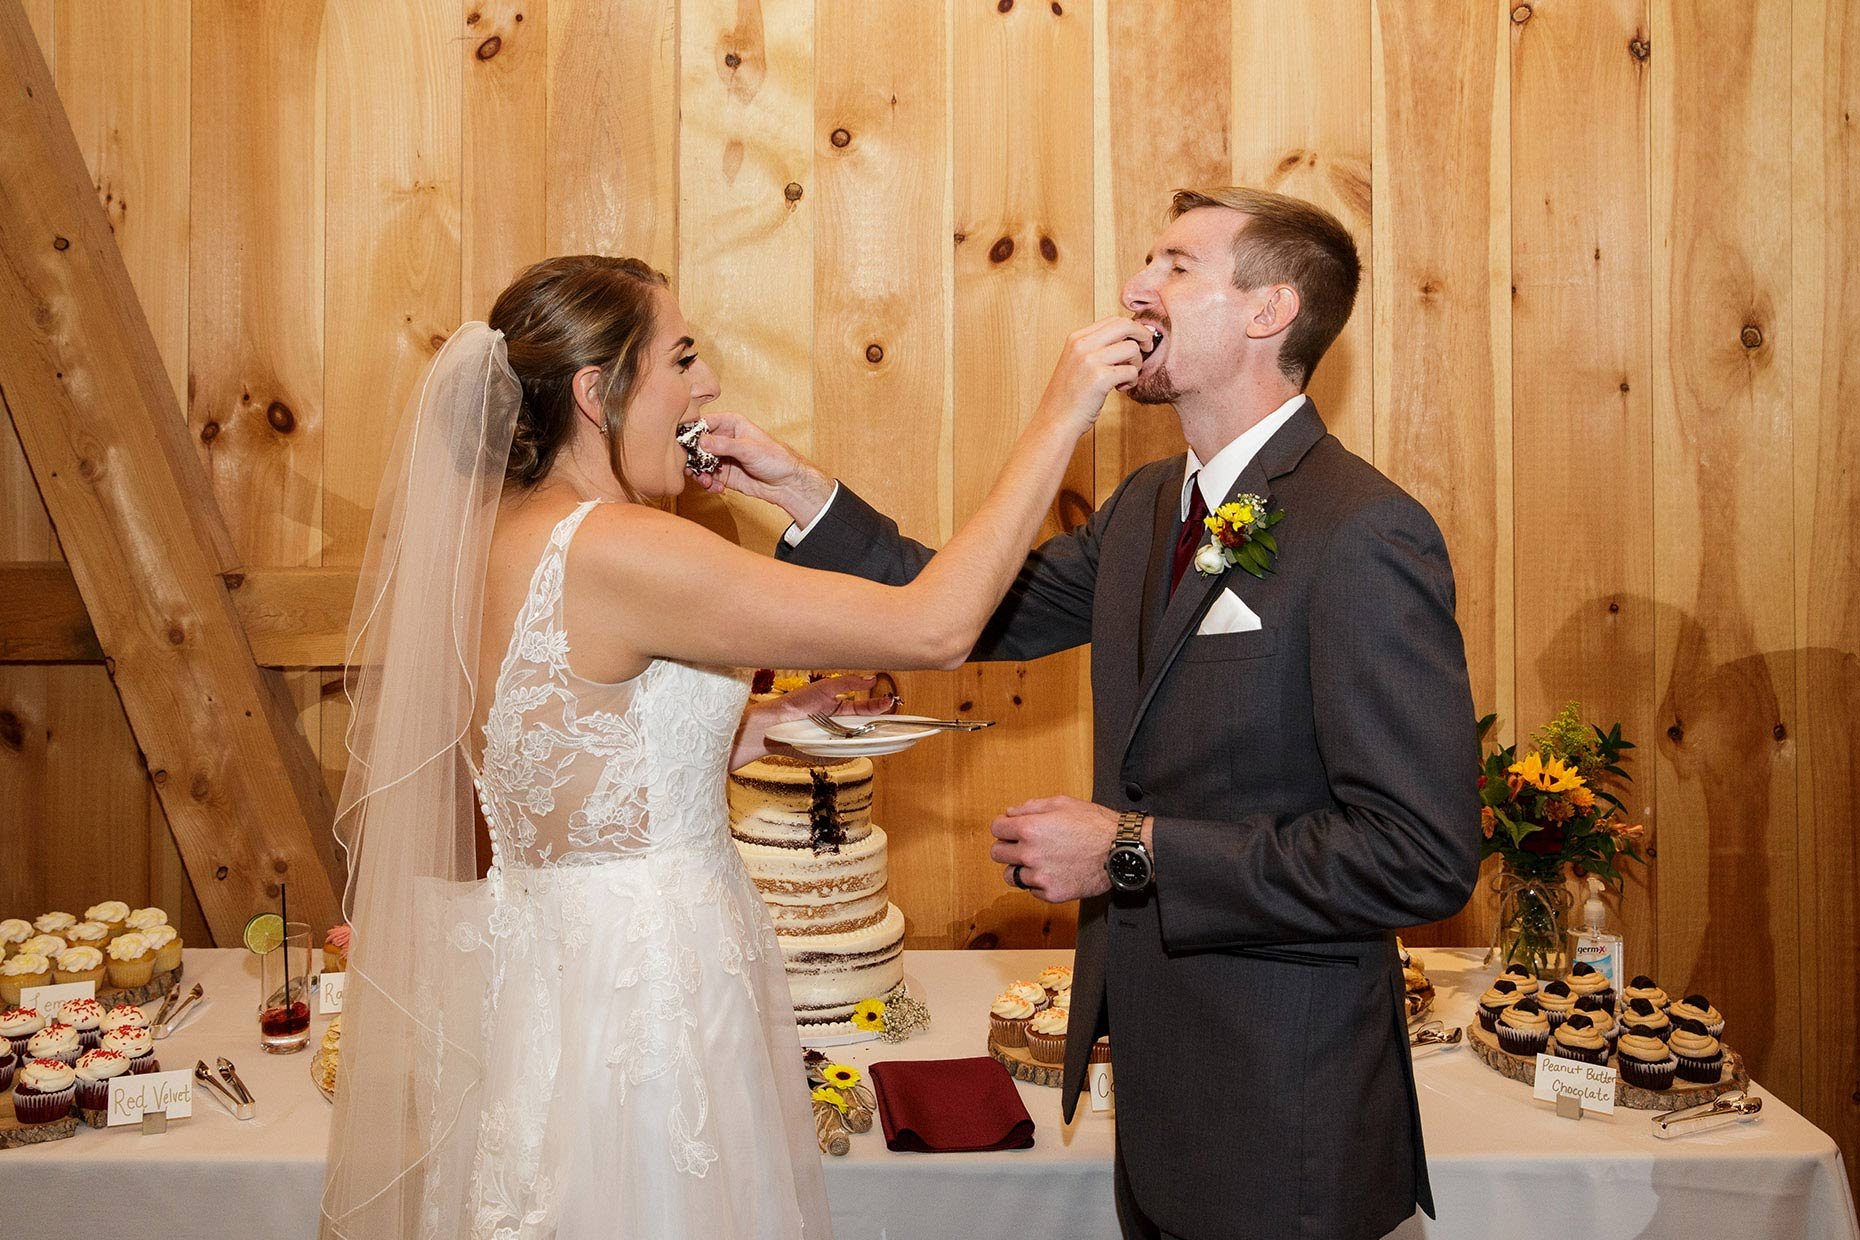 Bride &amp; Groom feed each other cake